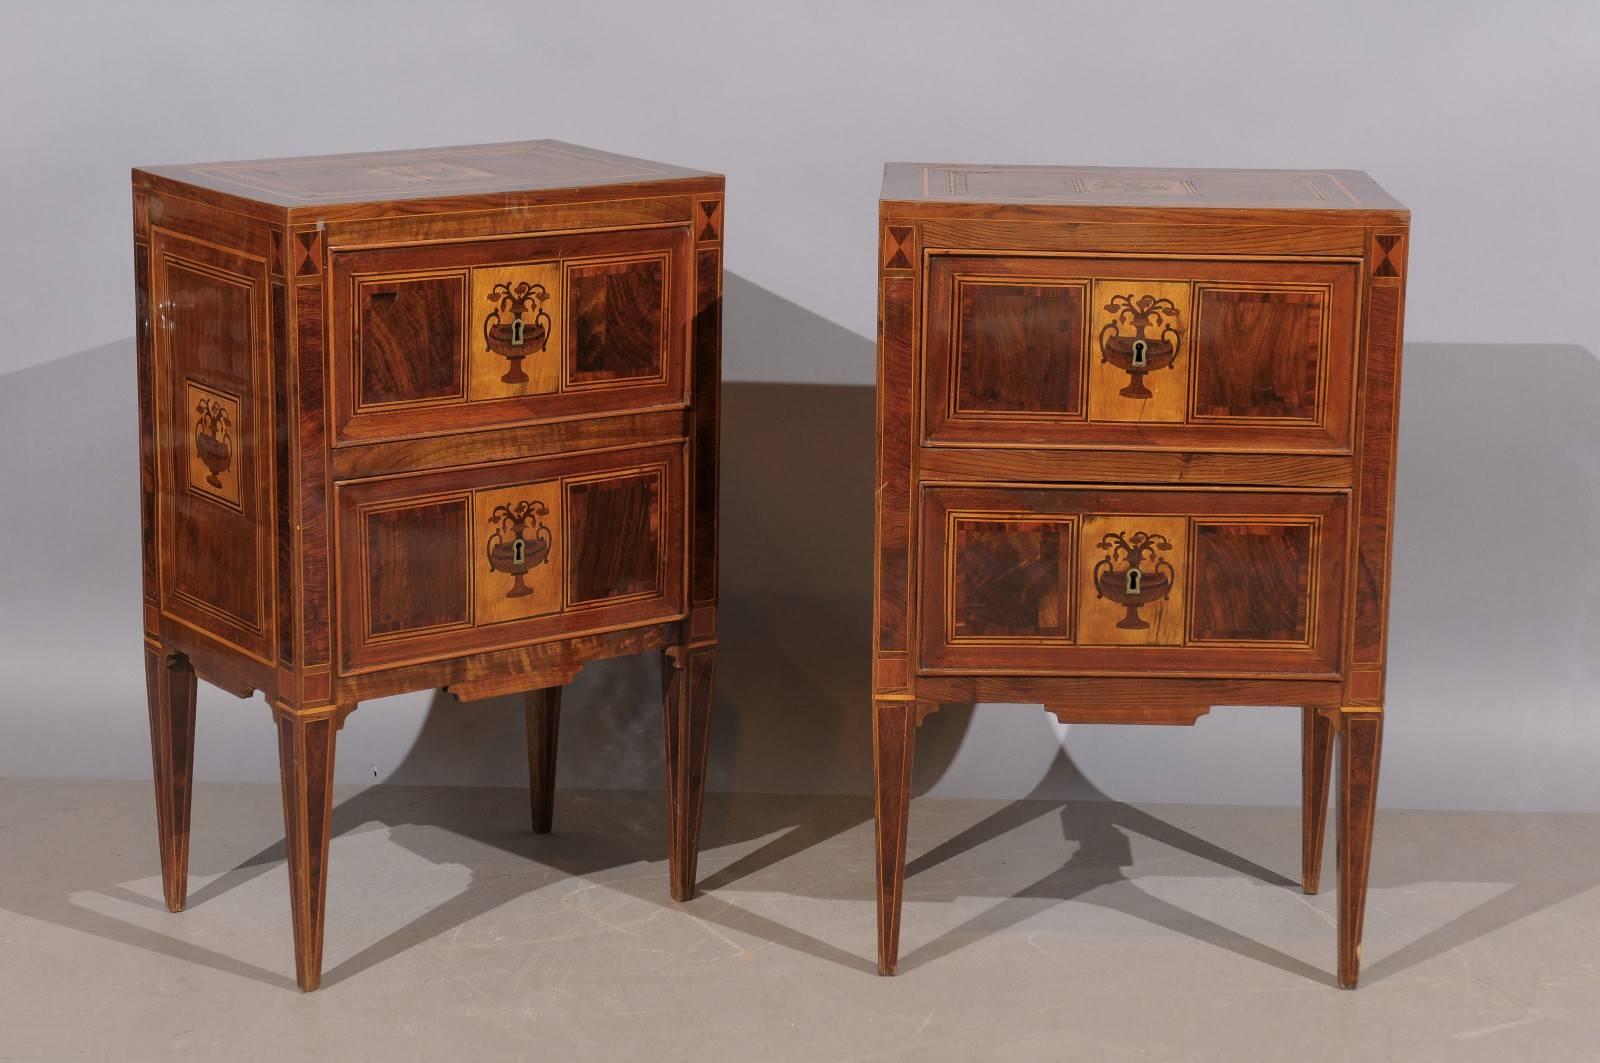 Pair of 19th century Italian neoclassical style commodinis with two drawers and marquetry inlay.